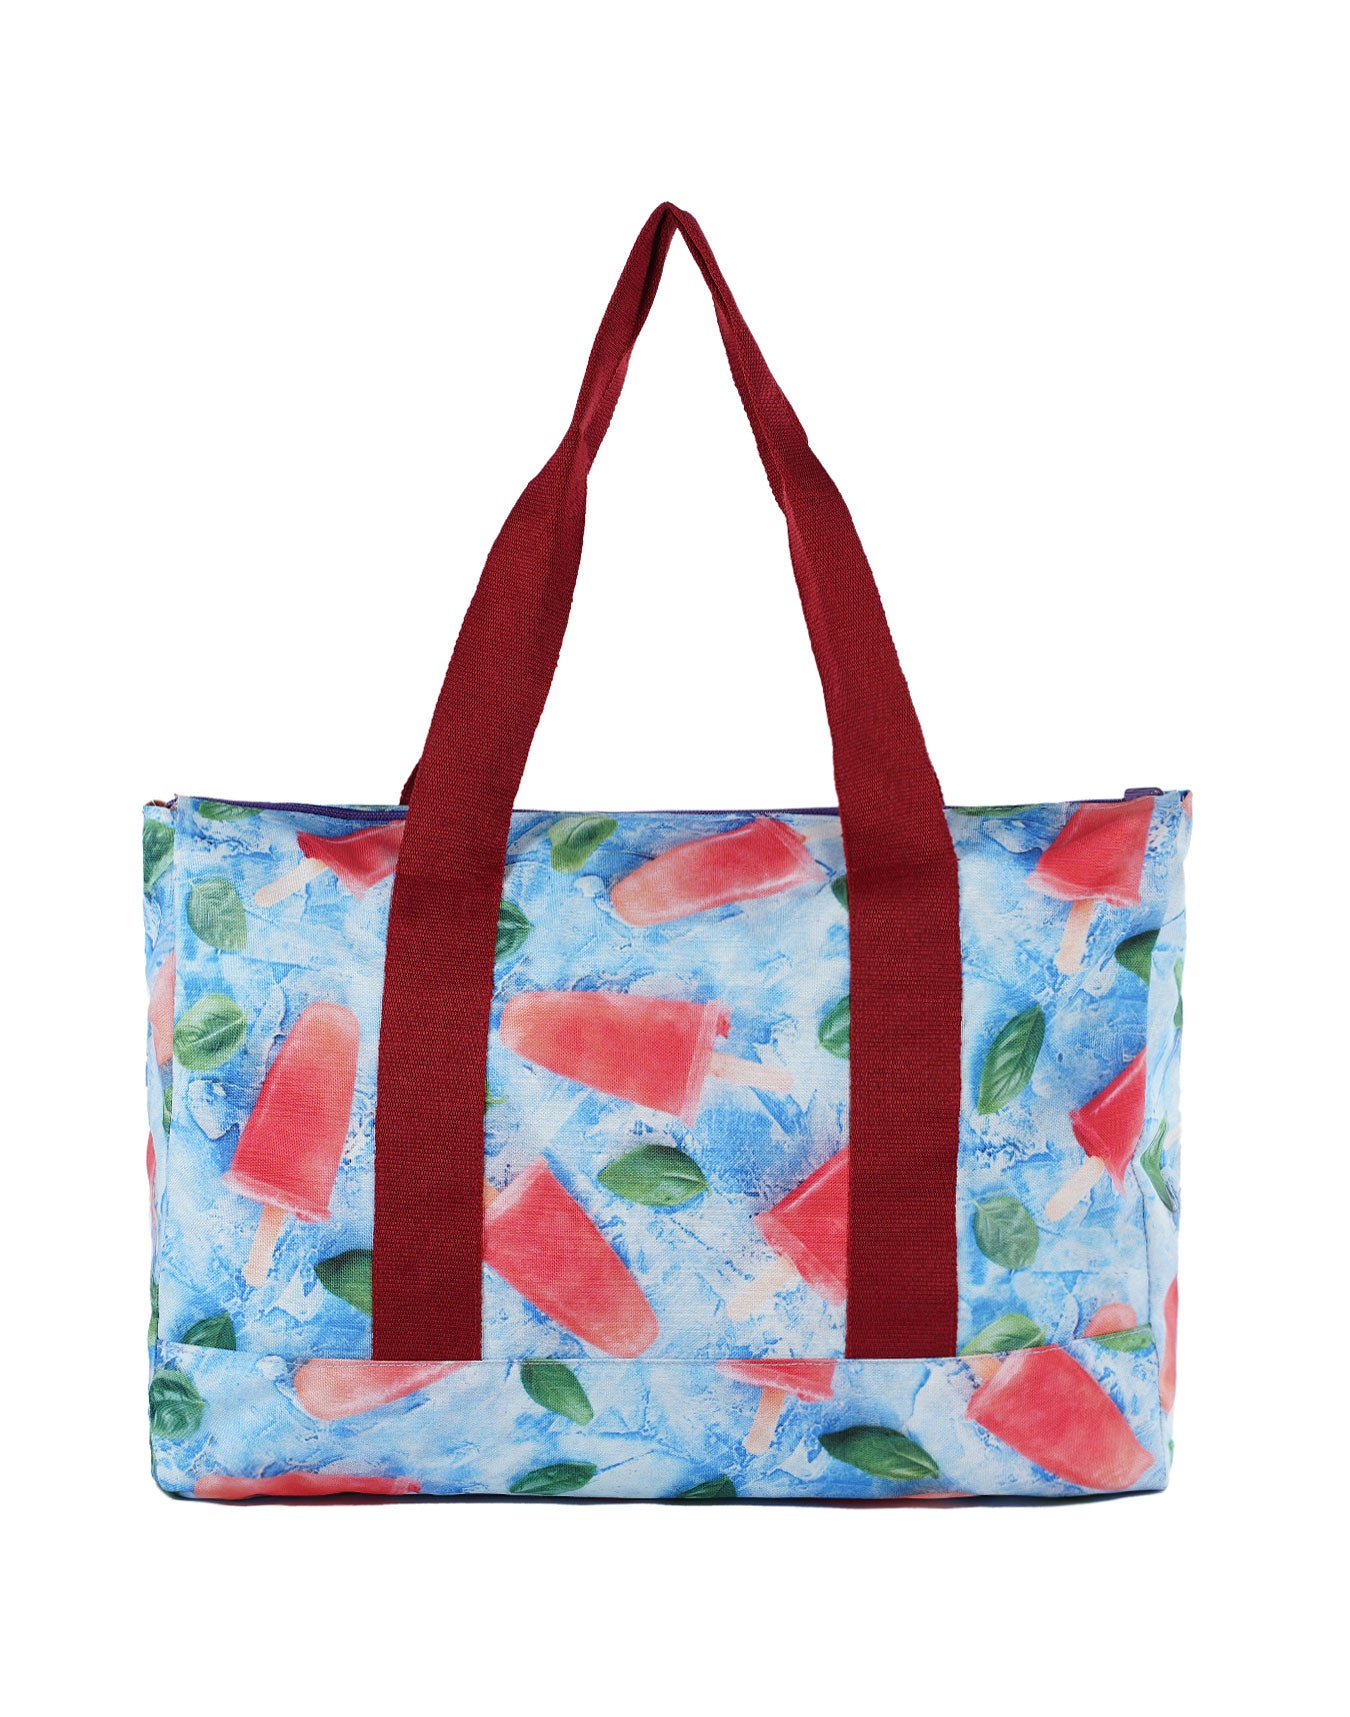 Water Melon Popsicle & Water Colors Women Tote Bag